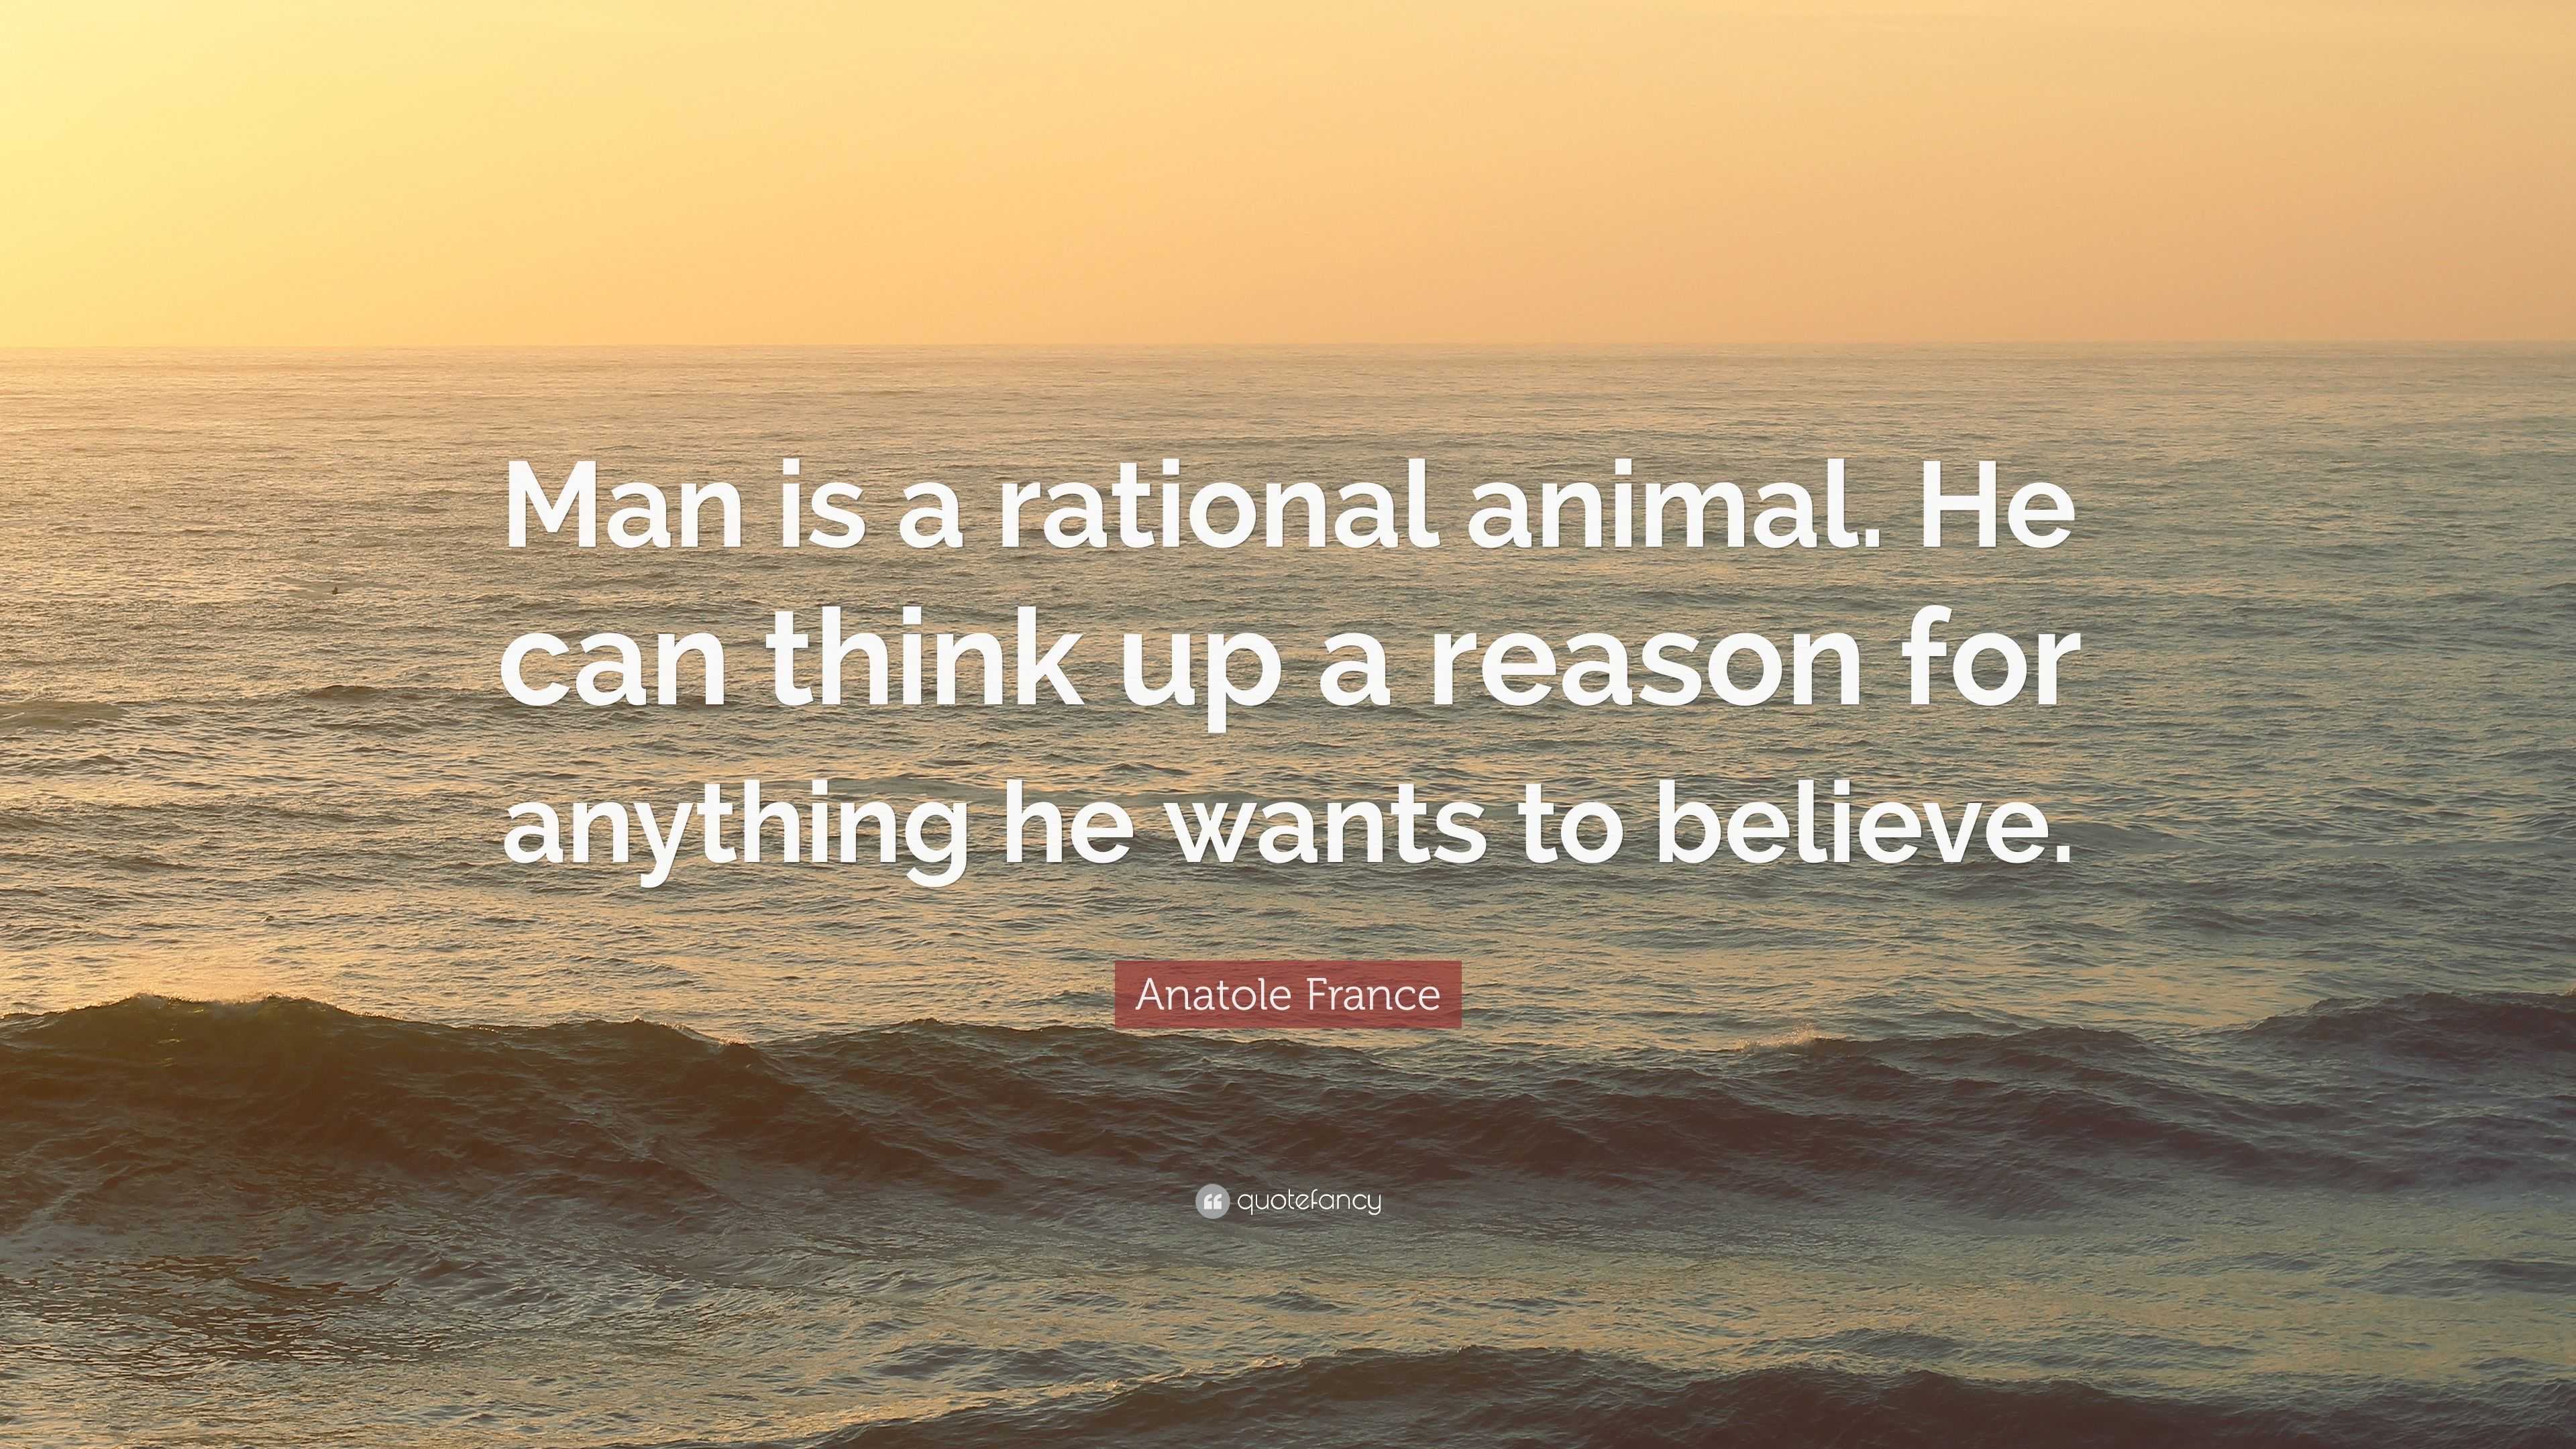 Anatole France Quote: “Man is a rational animal. He can think up a reason  for anything